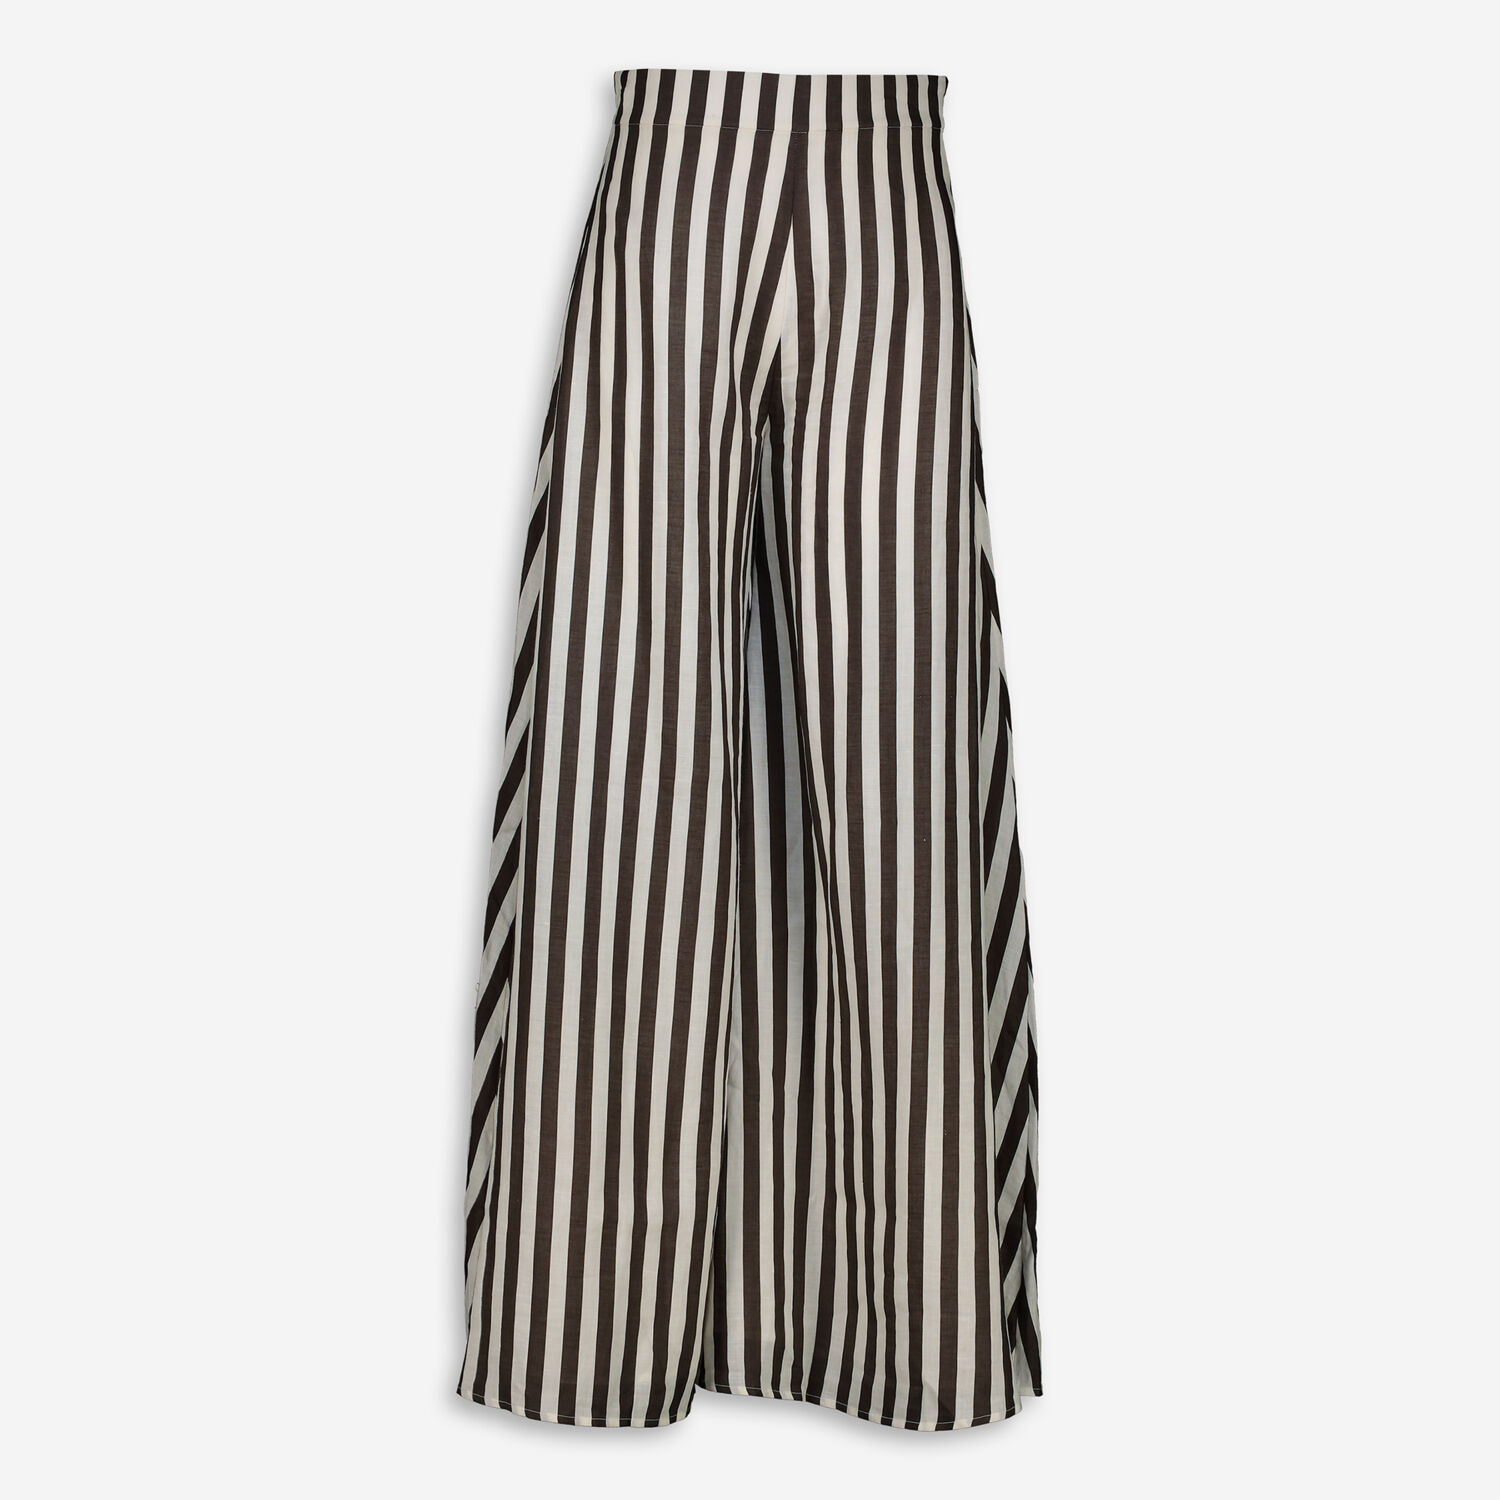 Red & White Striped Trousers - TK Maxx UK